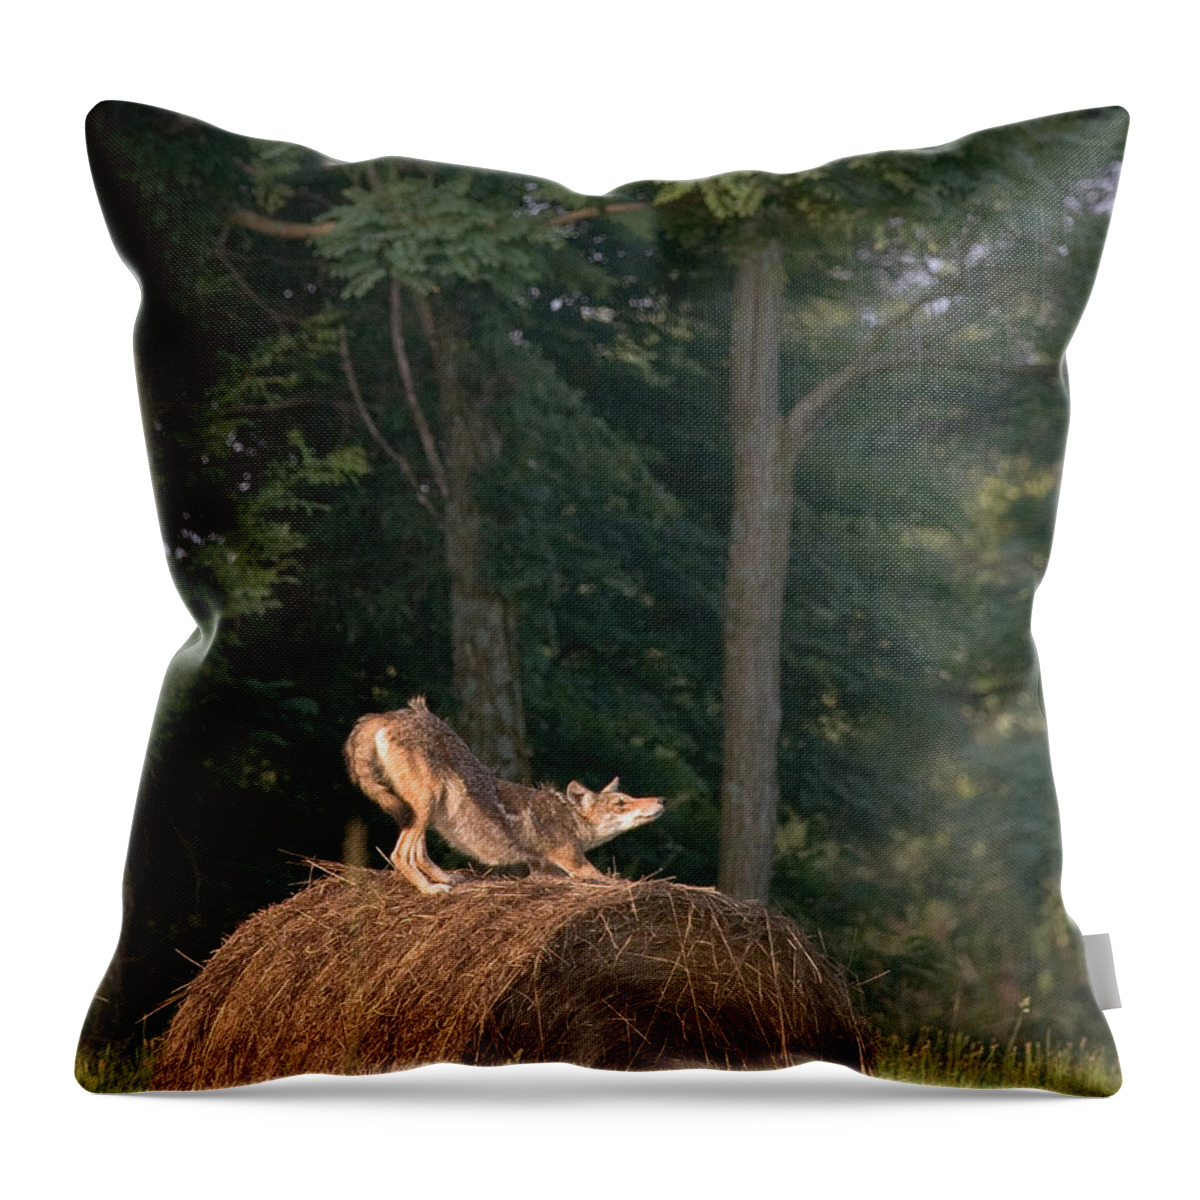 Coyote Throw Pillow featuring the photograph Coyote Stretching on Hay Bale by Michael Dougherty